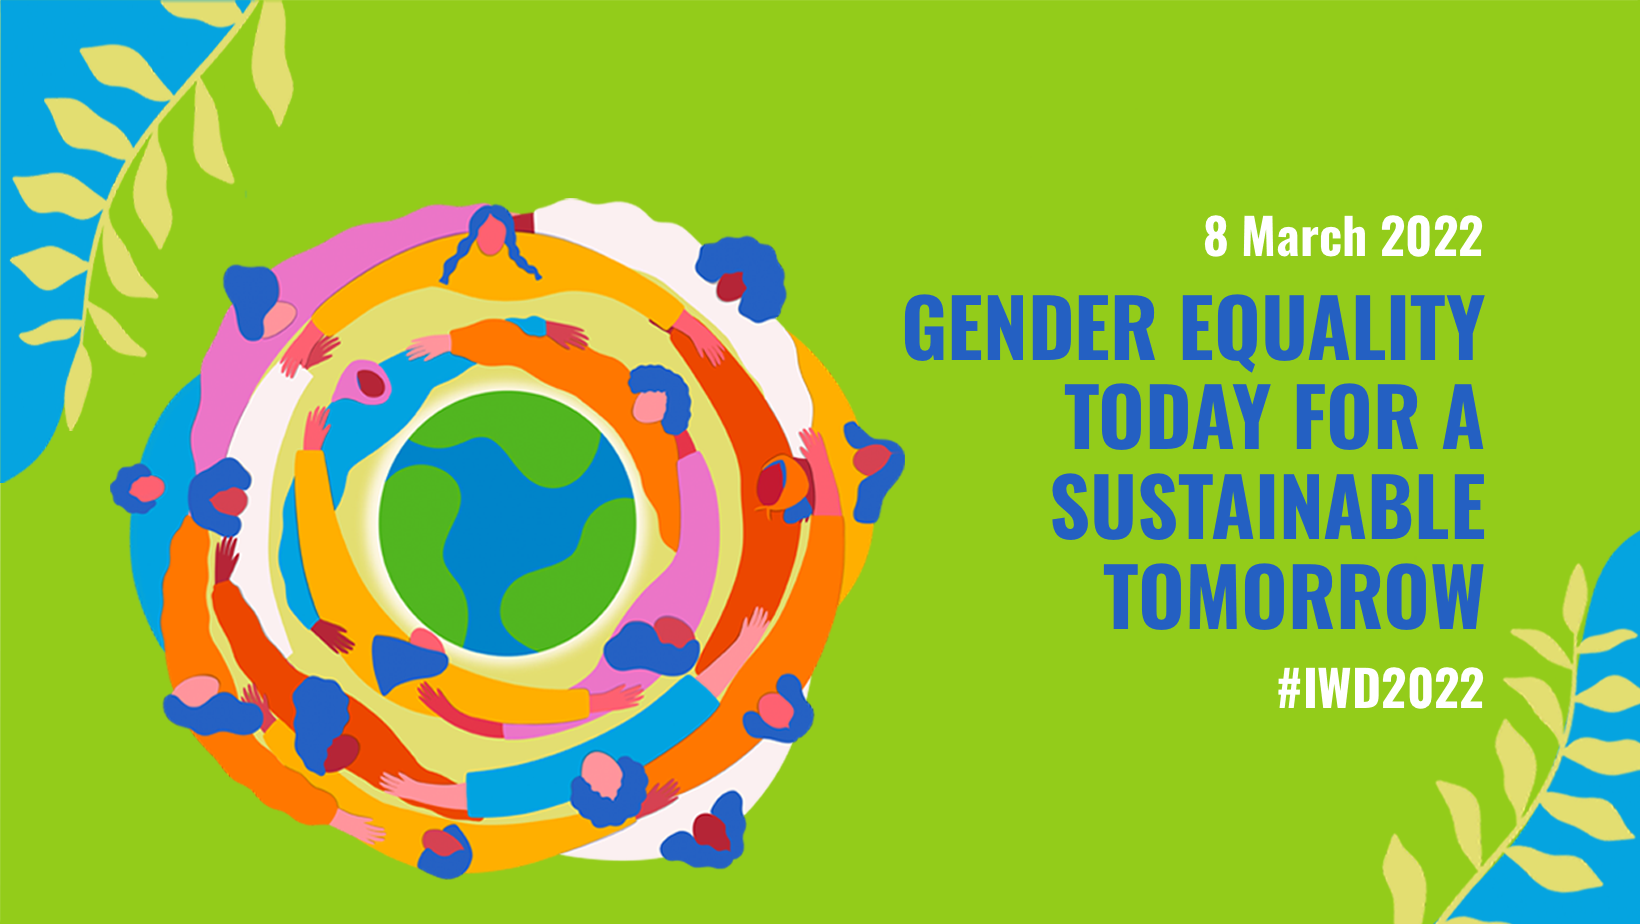 United Nation's poster for the International Women's Day of 2022. The image shows a group of women hugging each other and forming a circle on a green background; on the right side there is the phrase "Gender equality today for a sustainable tomorrow"